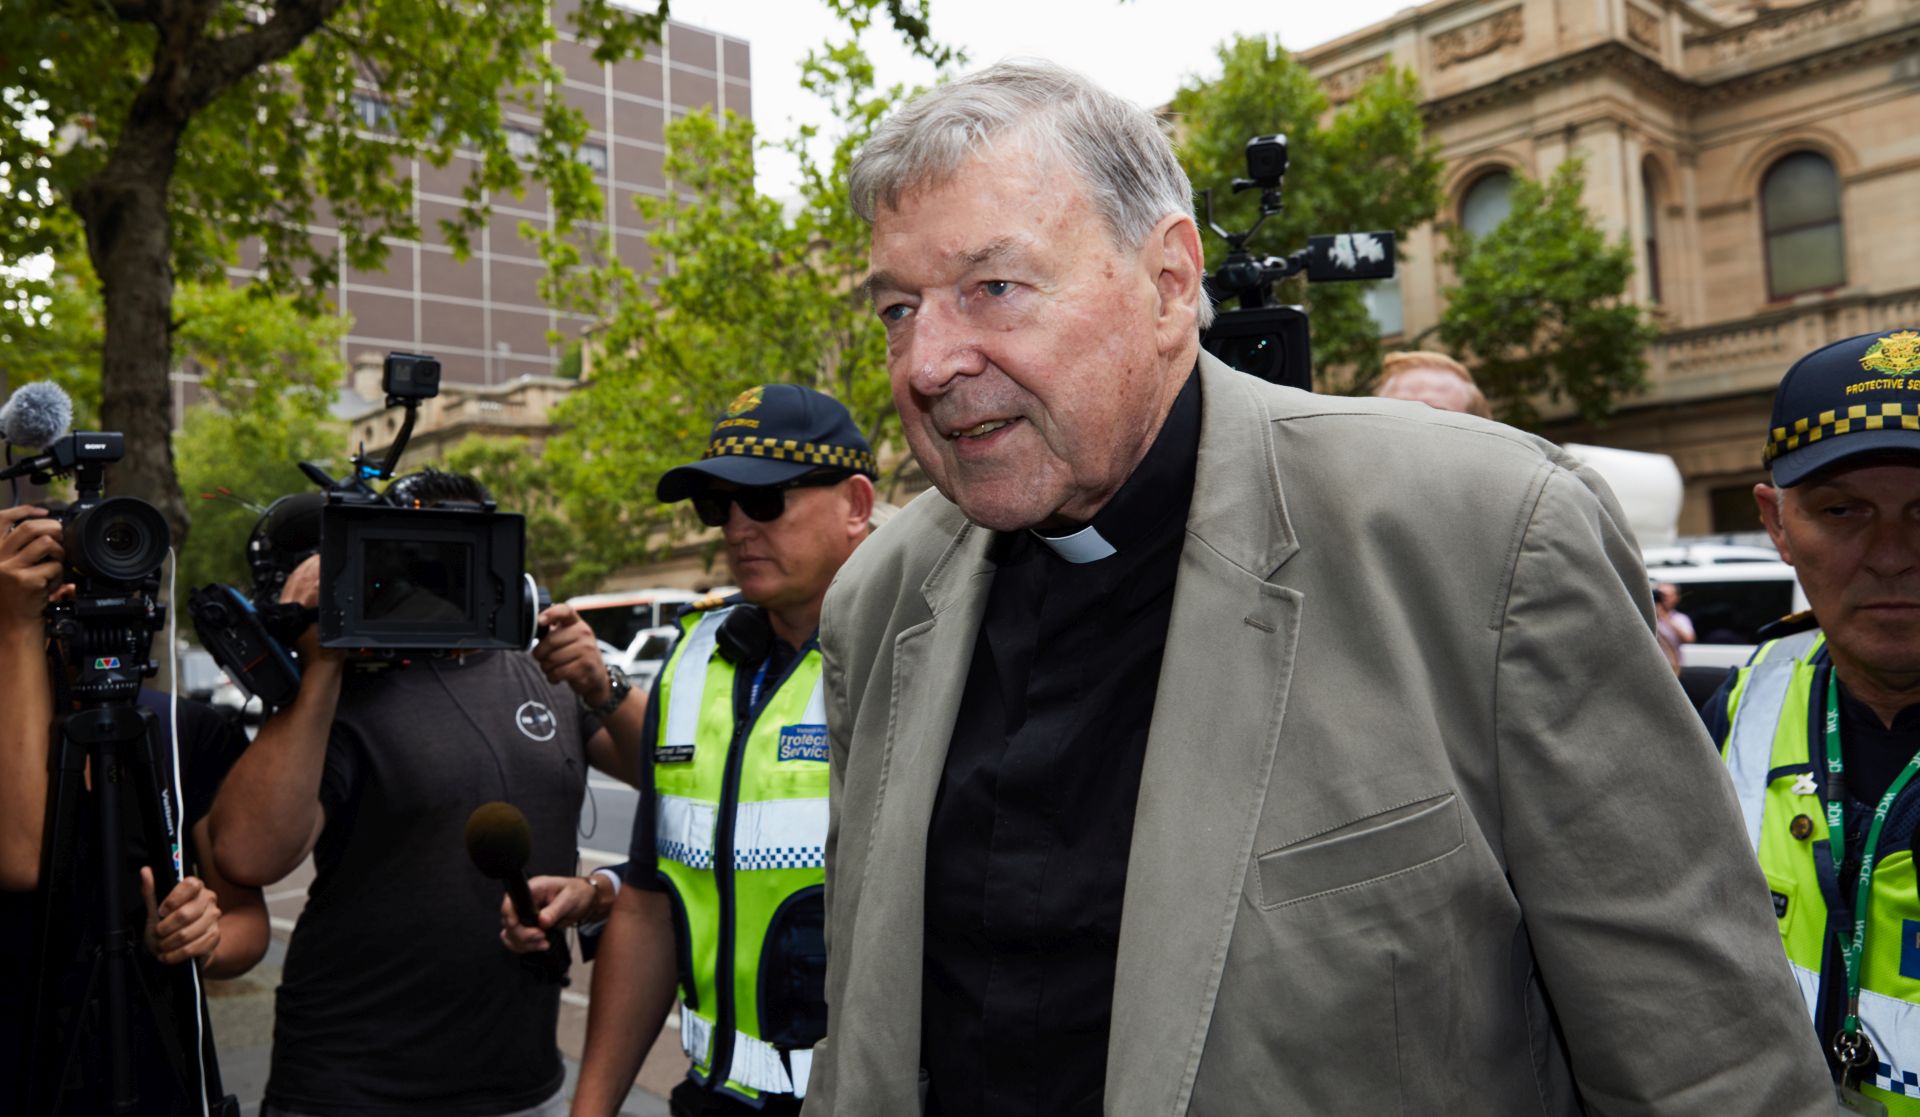 epa07397757 Cardinal George Pell arrives at the County Court in Melbourne, Australia, 26 February 2019. Australia's most senior Catholic Cardinal George Pell was found guilty on five charges of child sexual assault after an unanimous verdict on 11 December 2018, the results of which were under a suppression order until being lifted on 26 February 2019.  EPA/ERIK ANDERSON AUSTRALIA AND NEW ZEALAND OUT